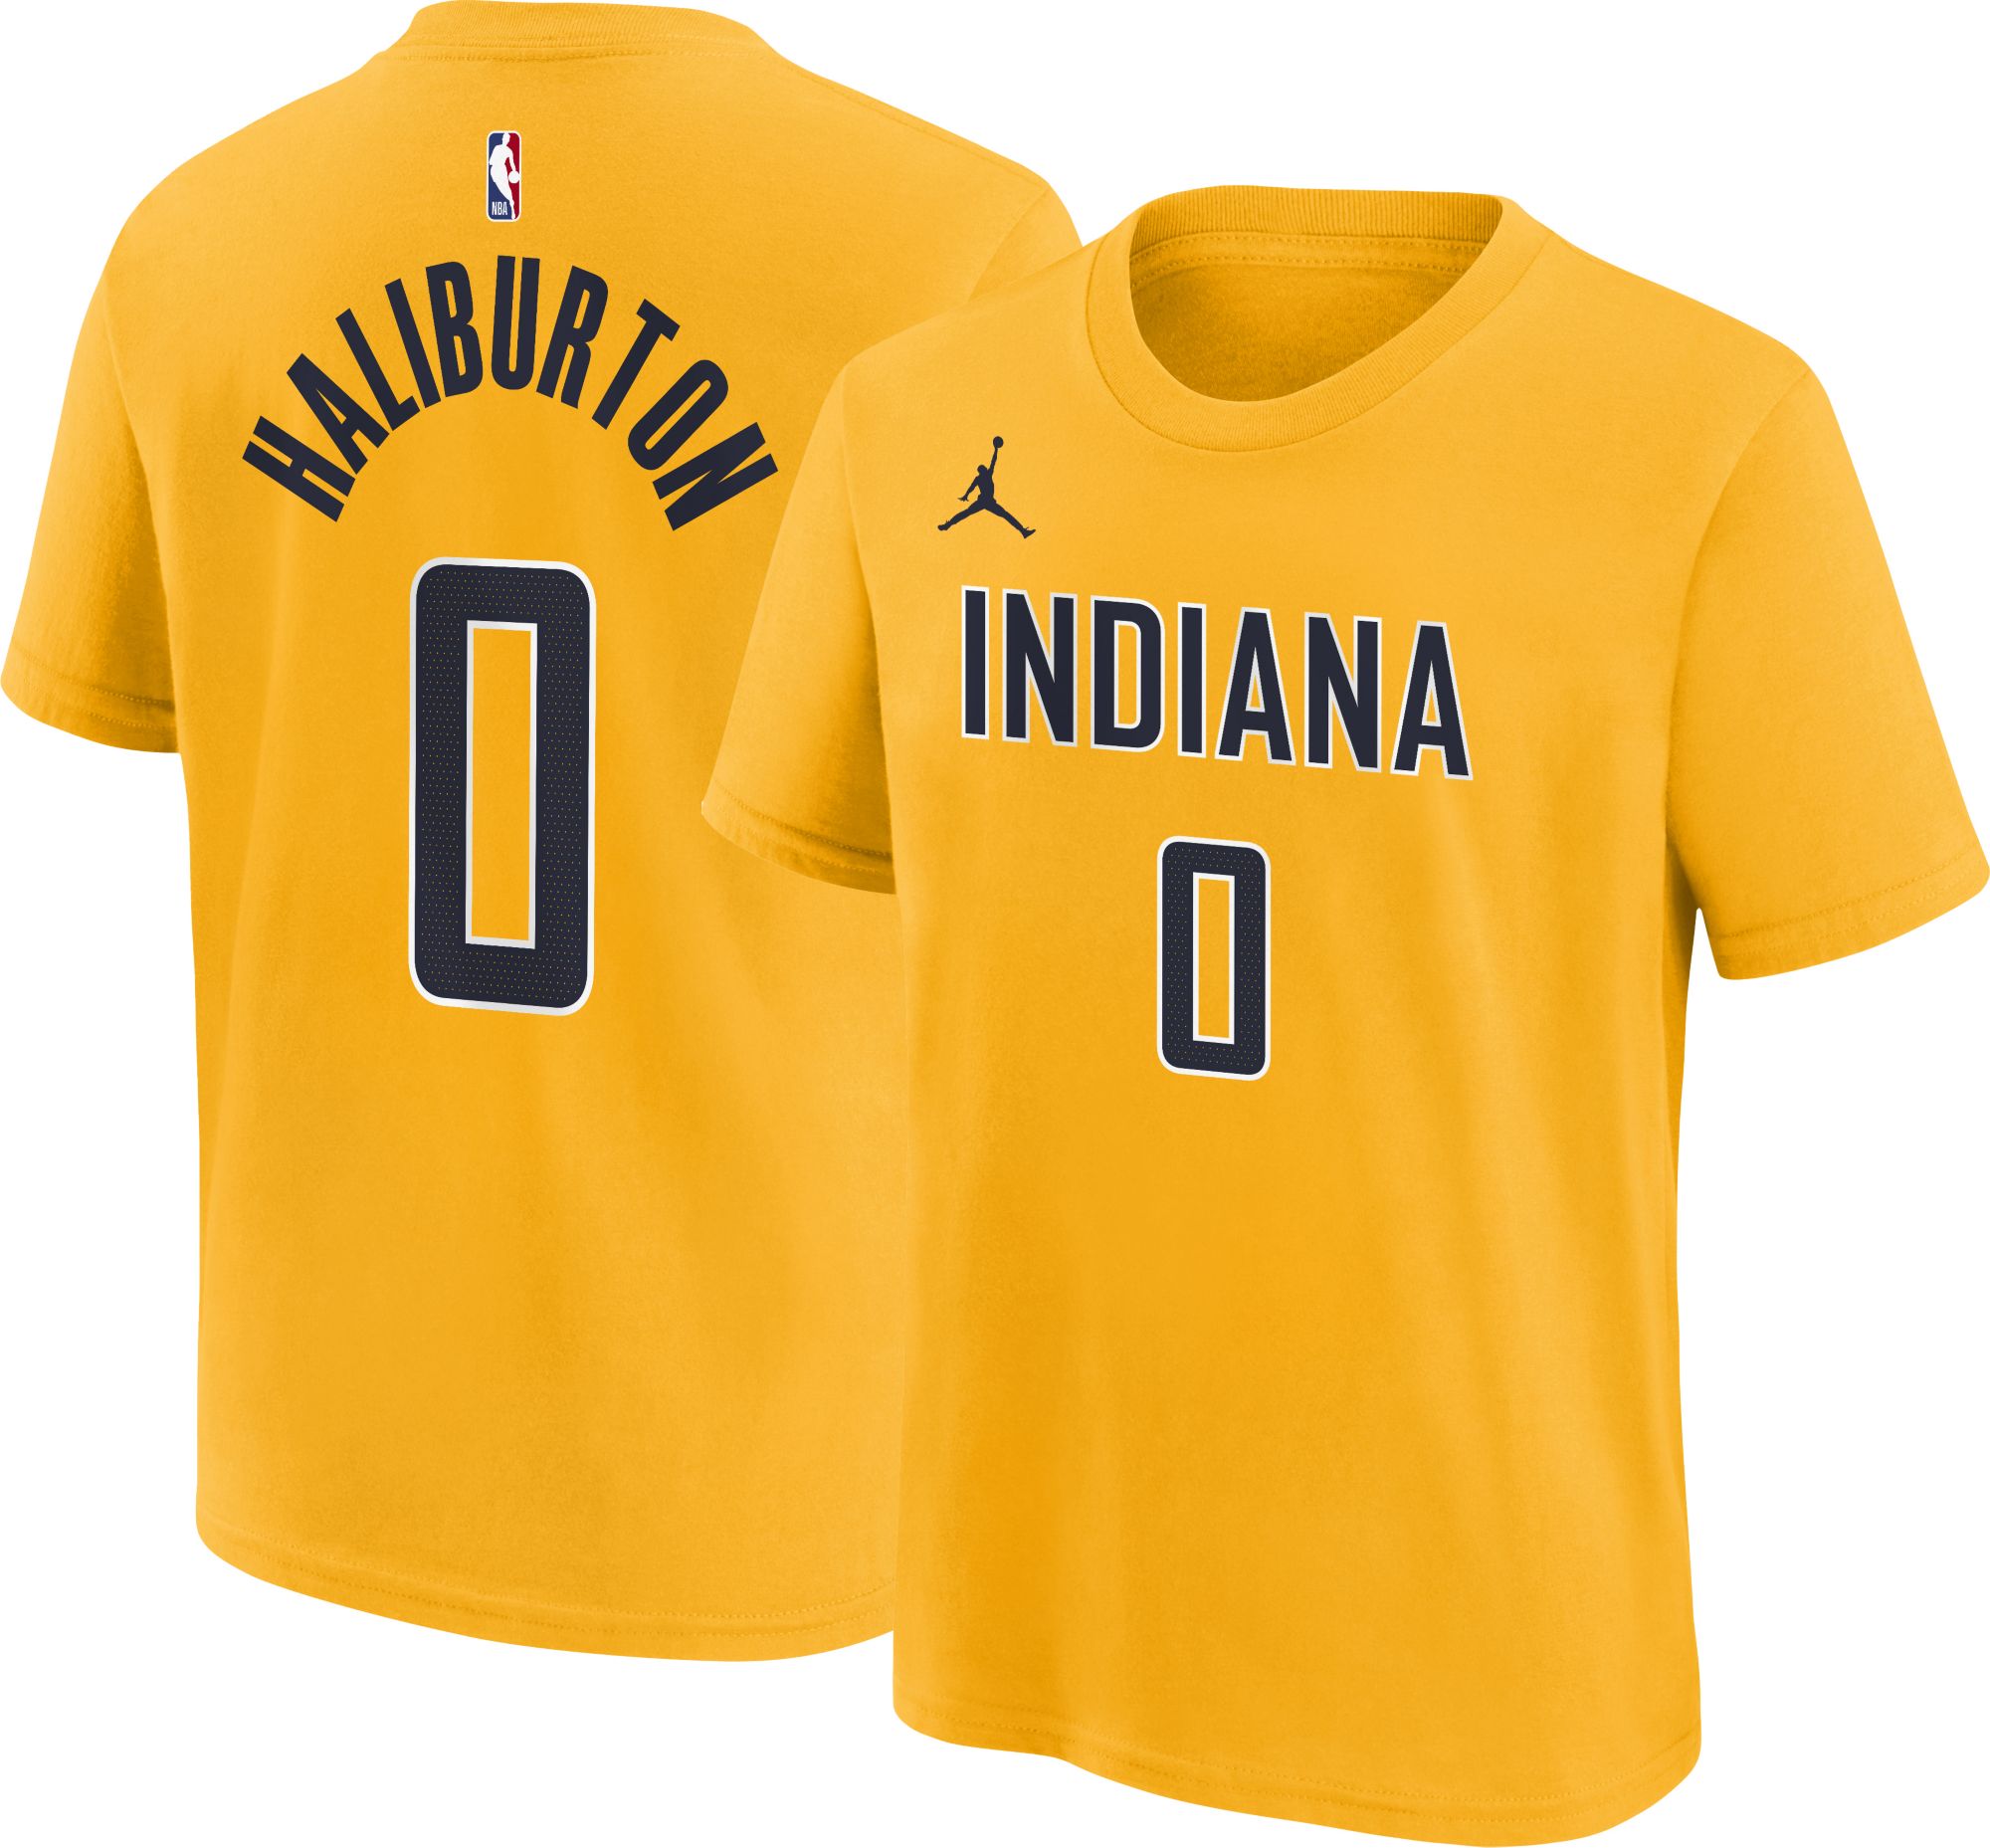 Indiana Pacers 24 Paul George Blue Yellow Strip Revolution 30 NBA Jerseys